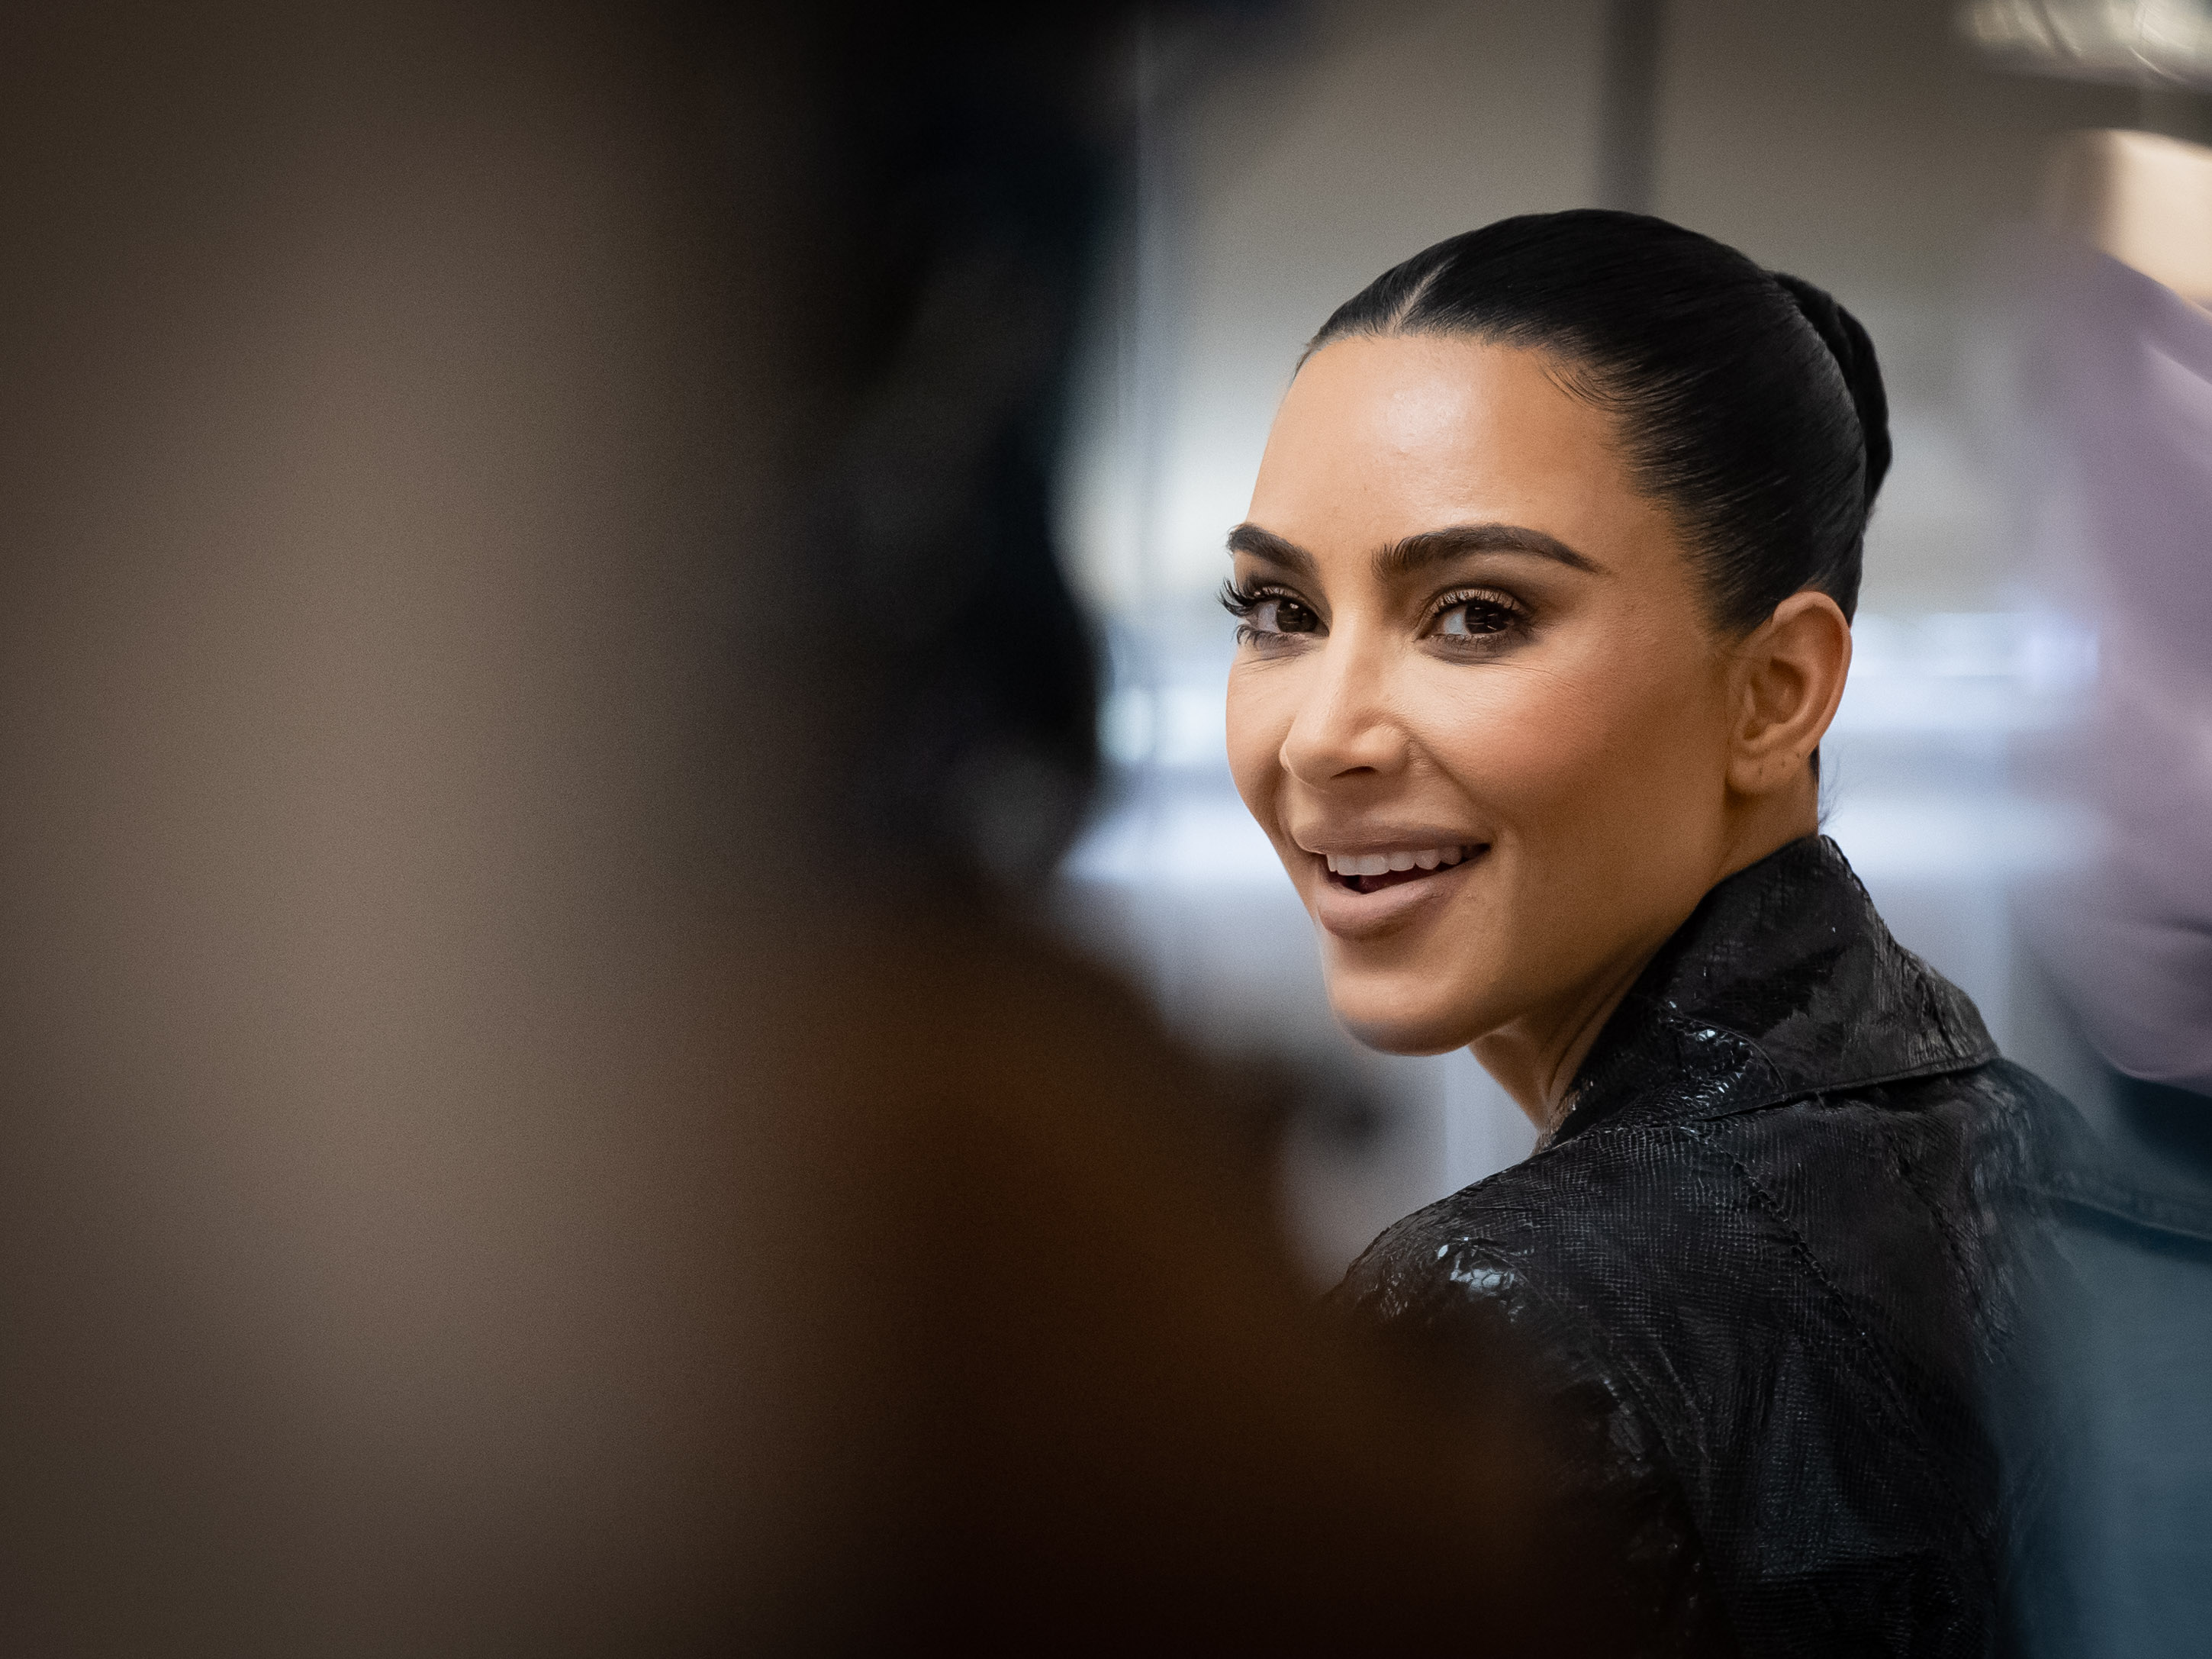 Kim Kardashian West's first Skims model is the woman she freed from prison